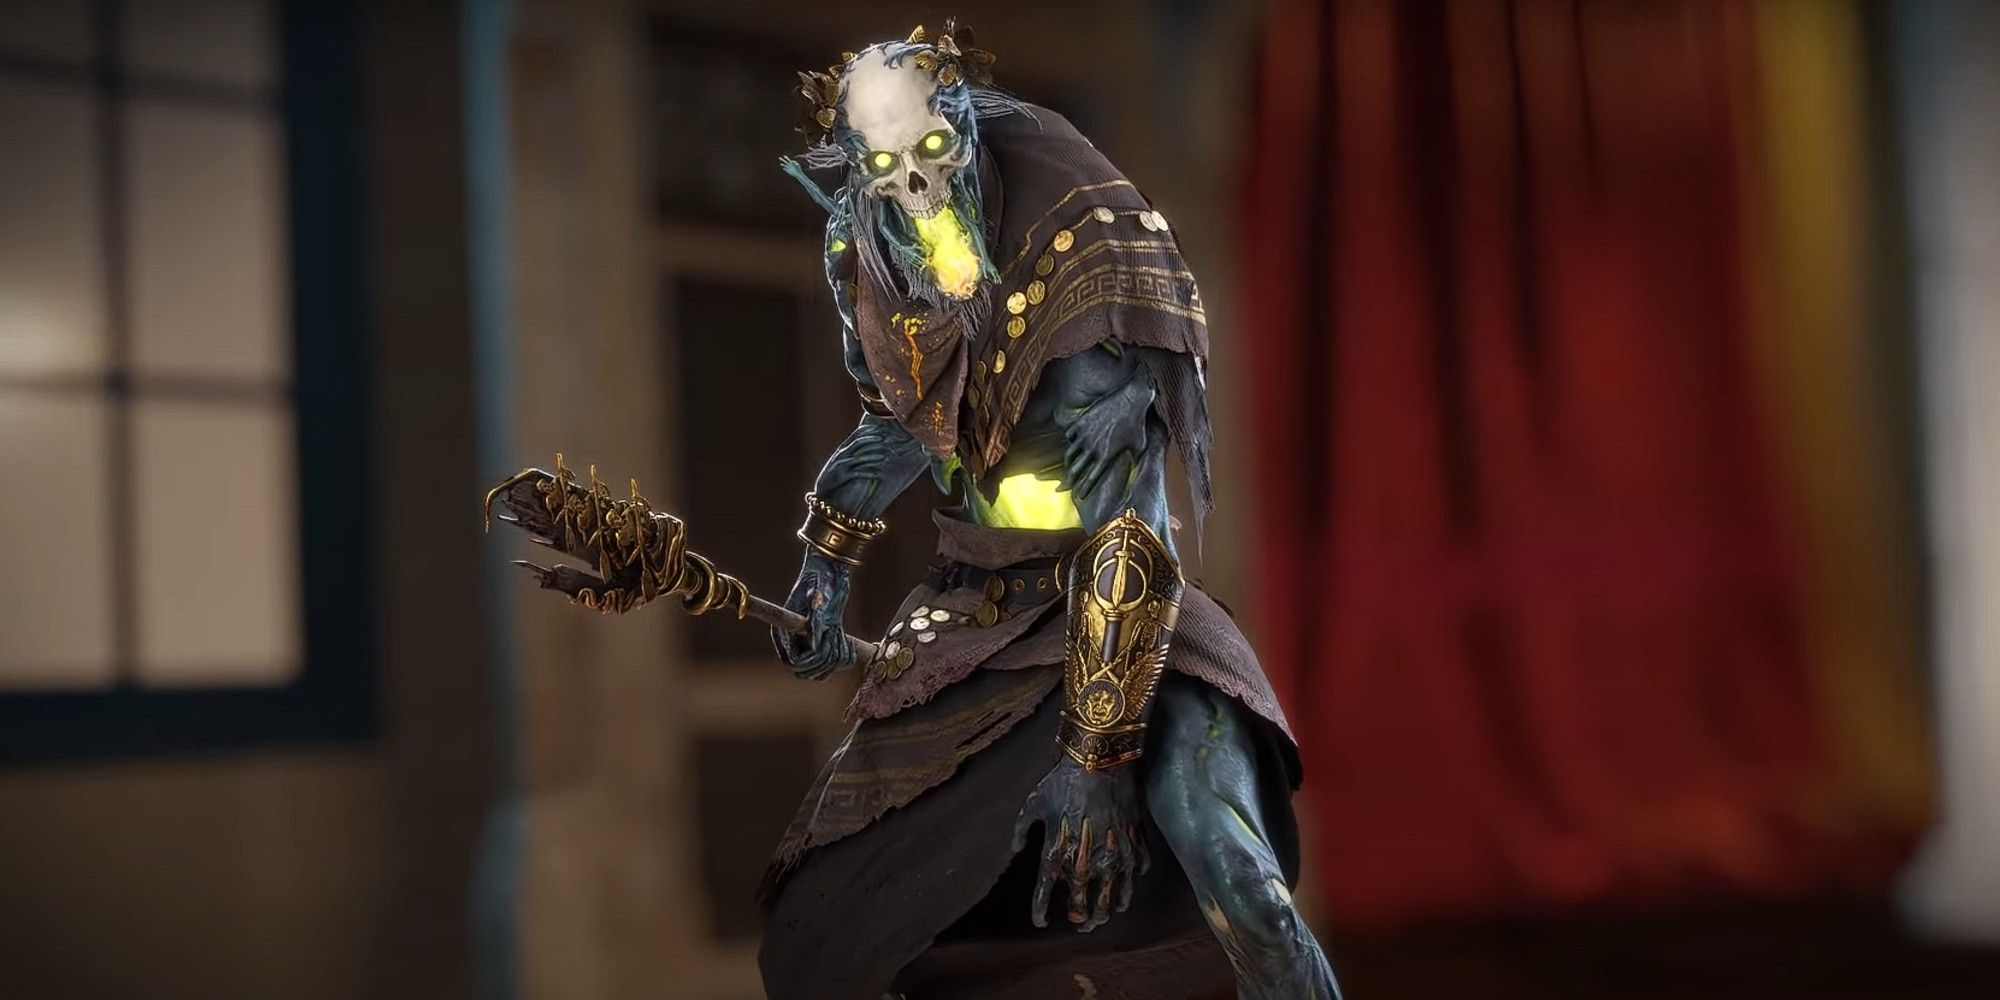 Blight as the Ferryman in the Greek Legends Cosmetic Collection for Dead By Daylight